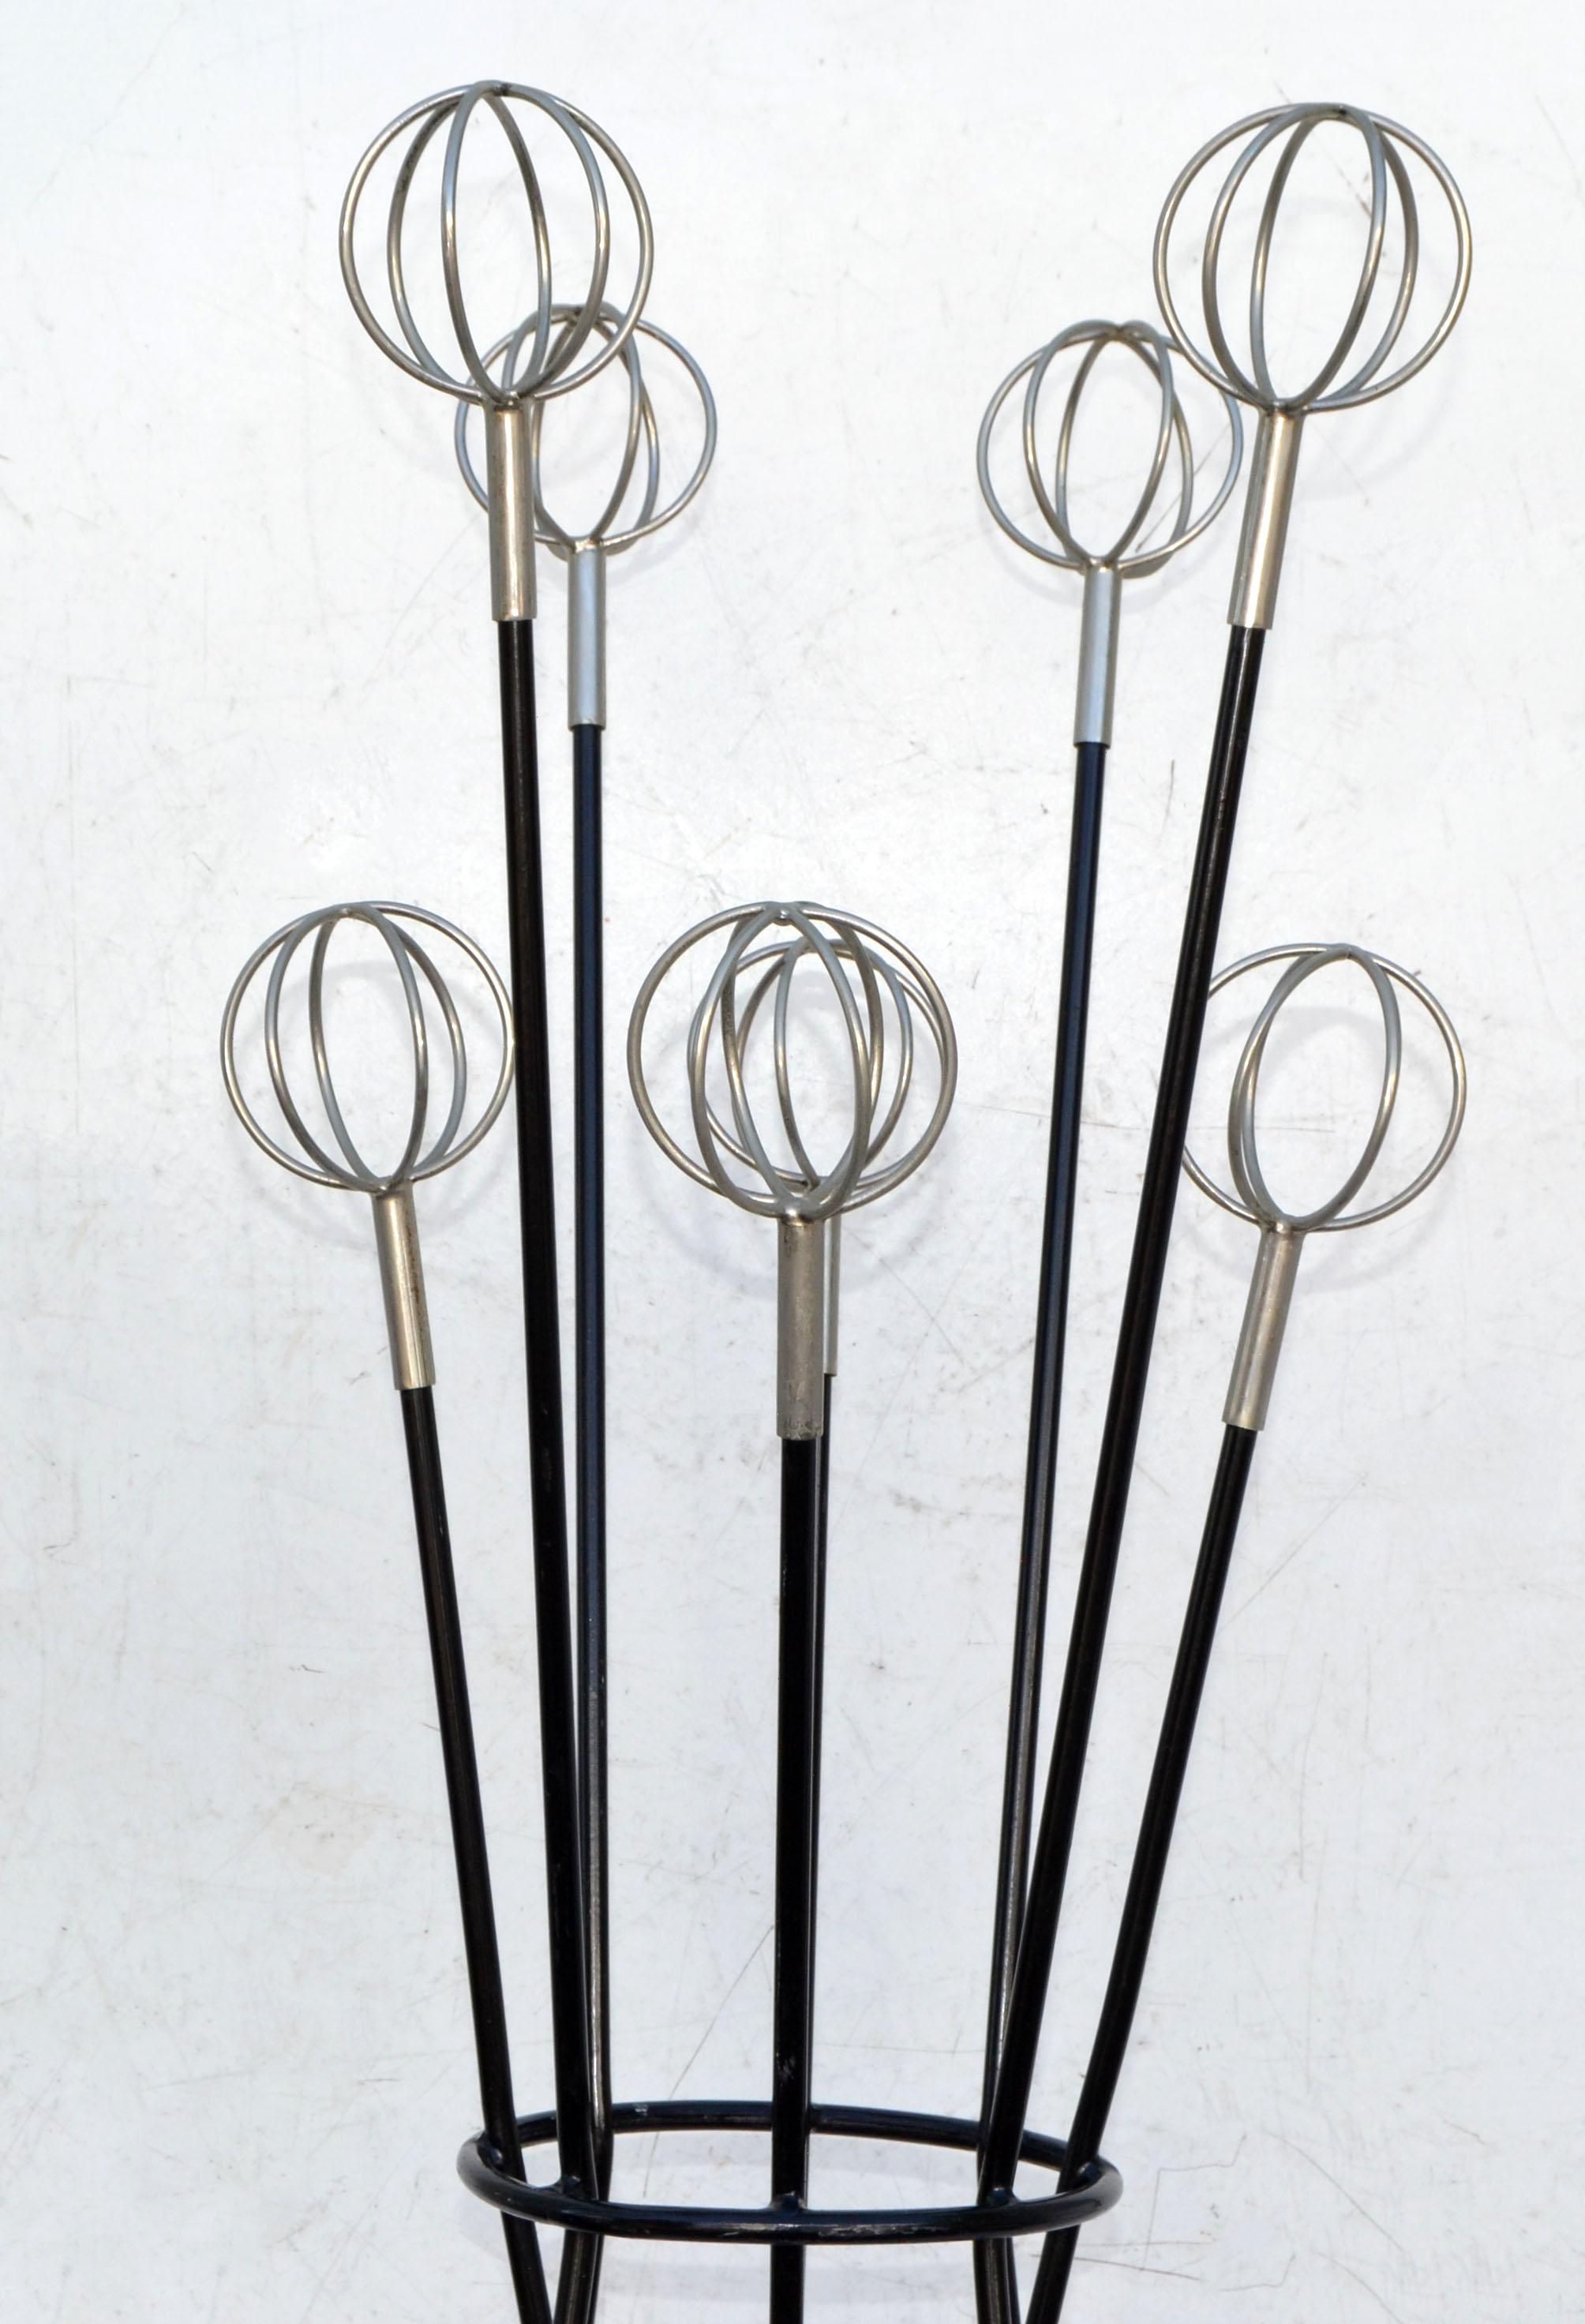 Roger Feraud French Mid-Century Modern Iron & Nickel Coat Hat Rack Space Age In Good Condition For Sale In Miami, FL